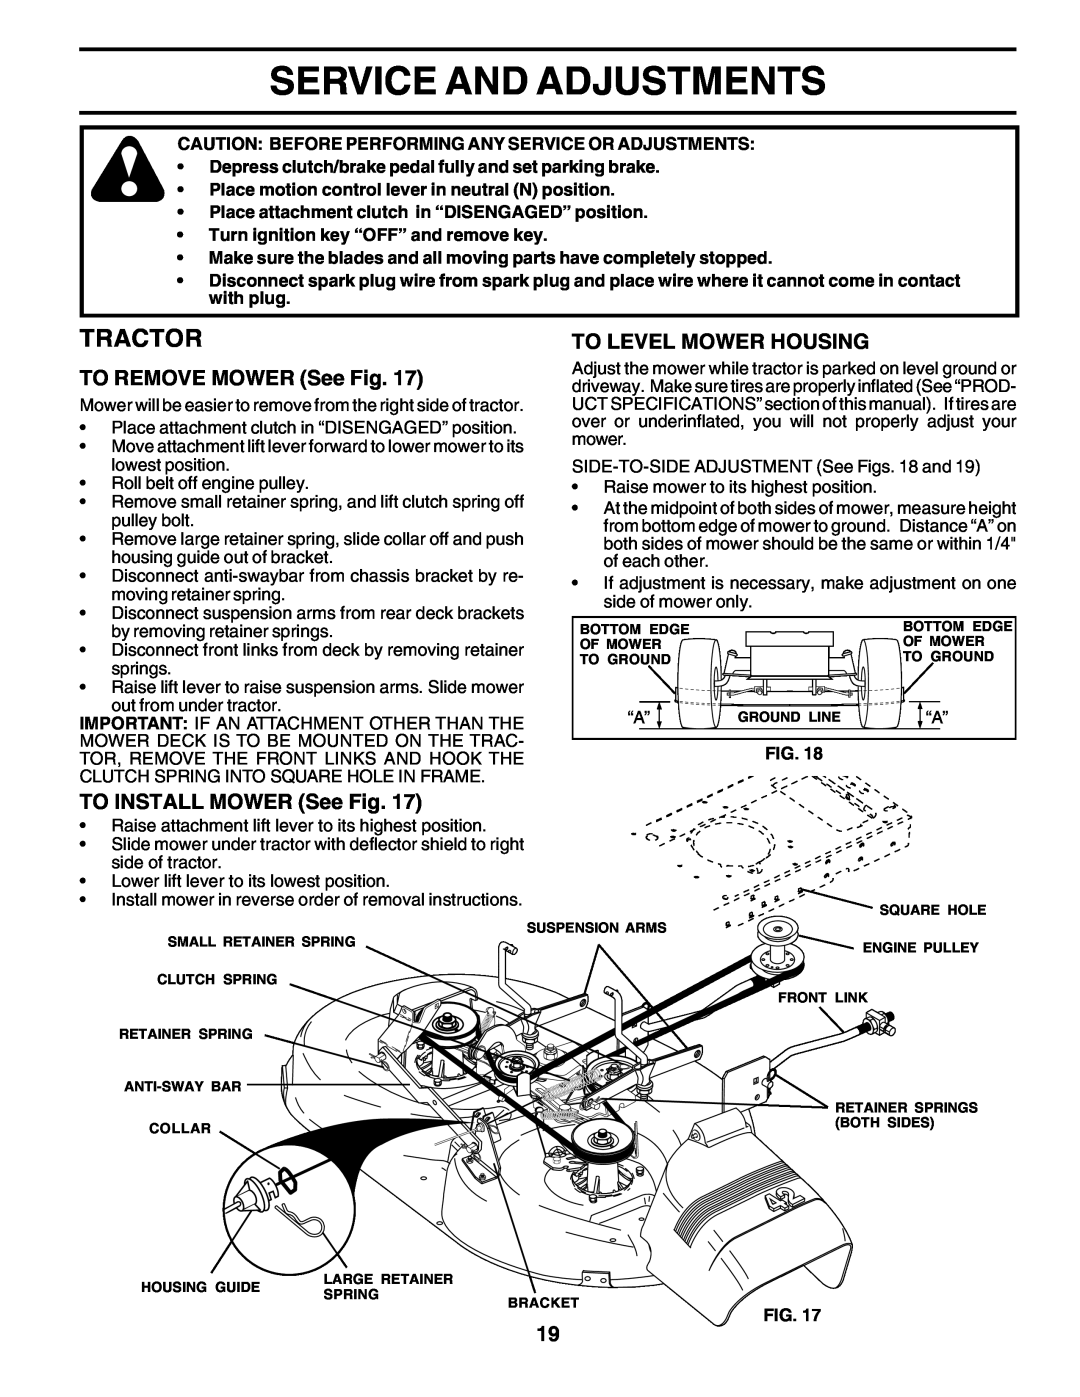 Poulan 178379 Service And Adjustments, TO REMOVE MOWER See Fig, To Level Mower Housing, TO INSTALL MOWER See Fig, Tractor 